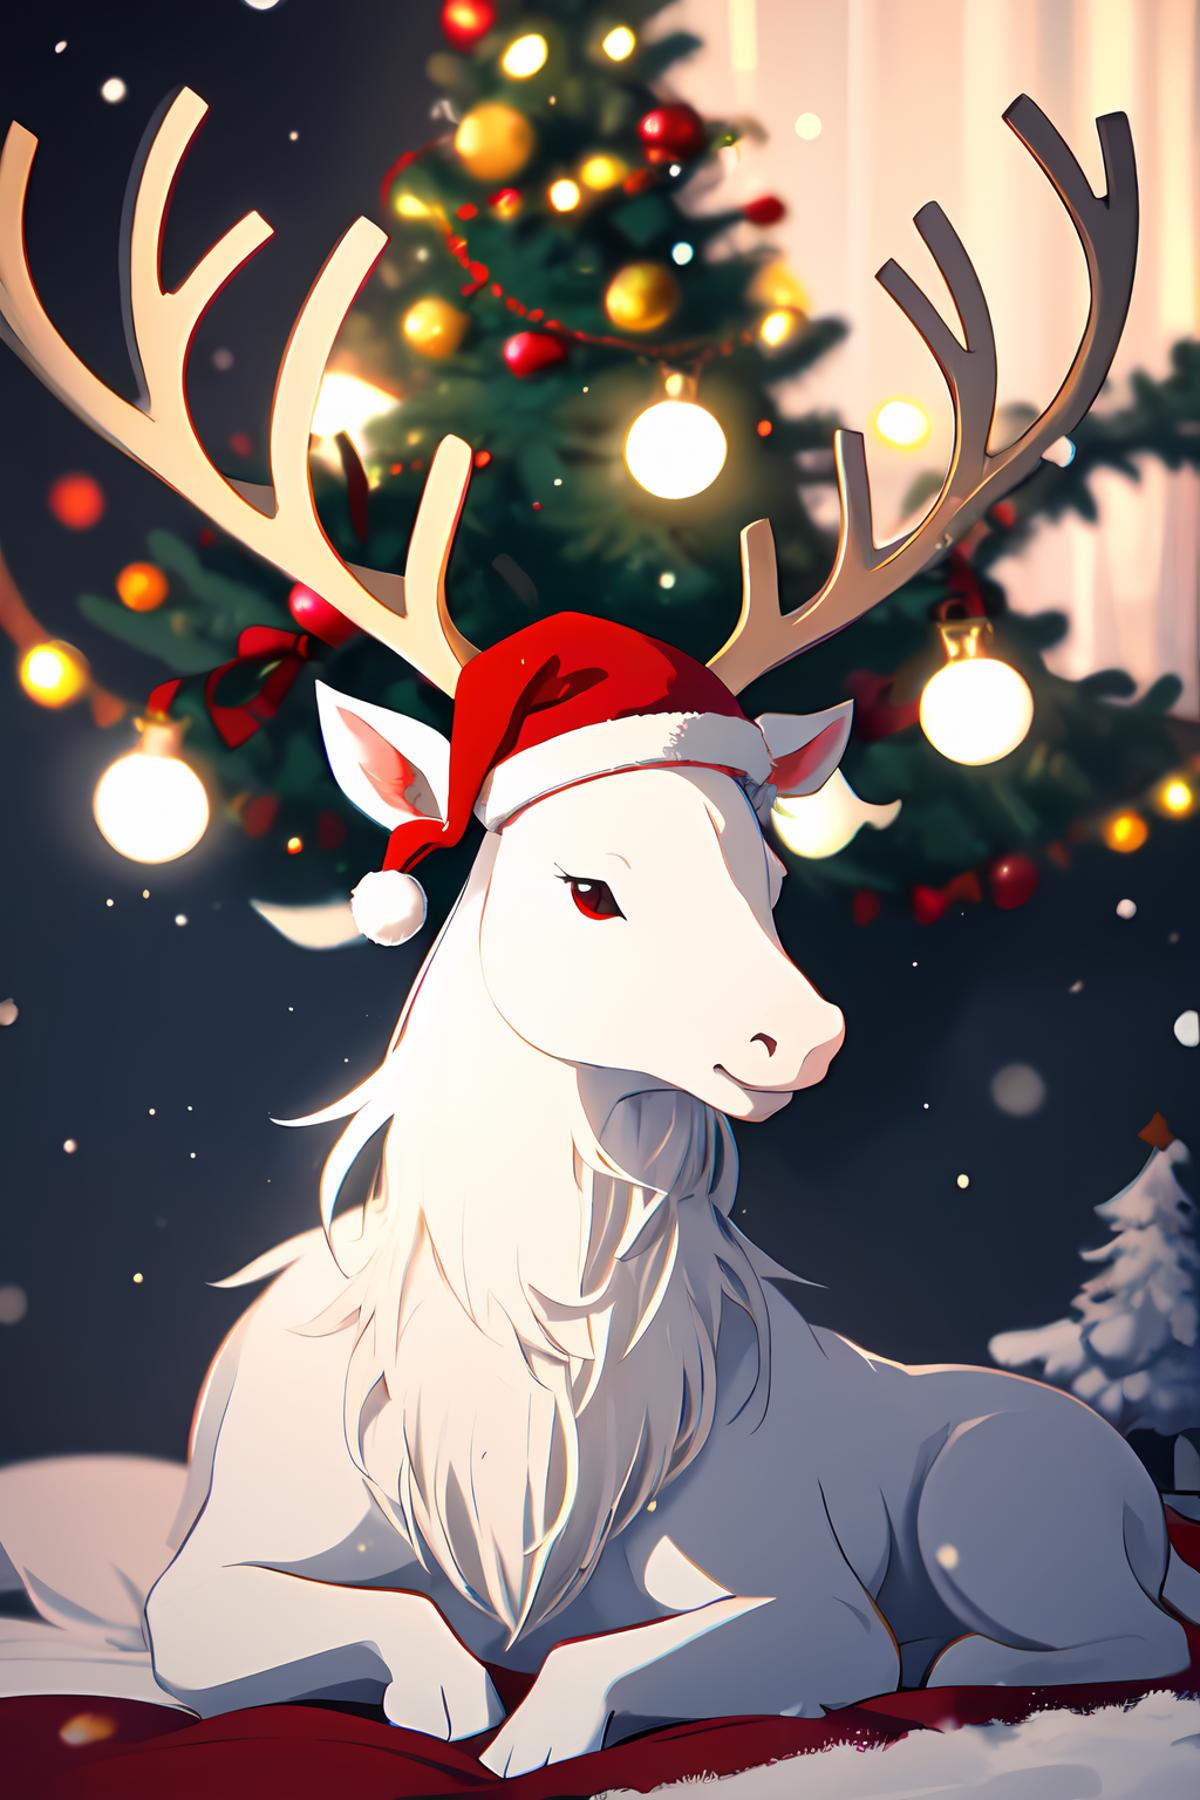 🦌 Reindeers for all your needs 🎄🎅🍎 image by Automaticism